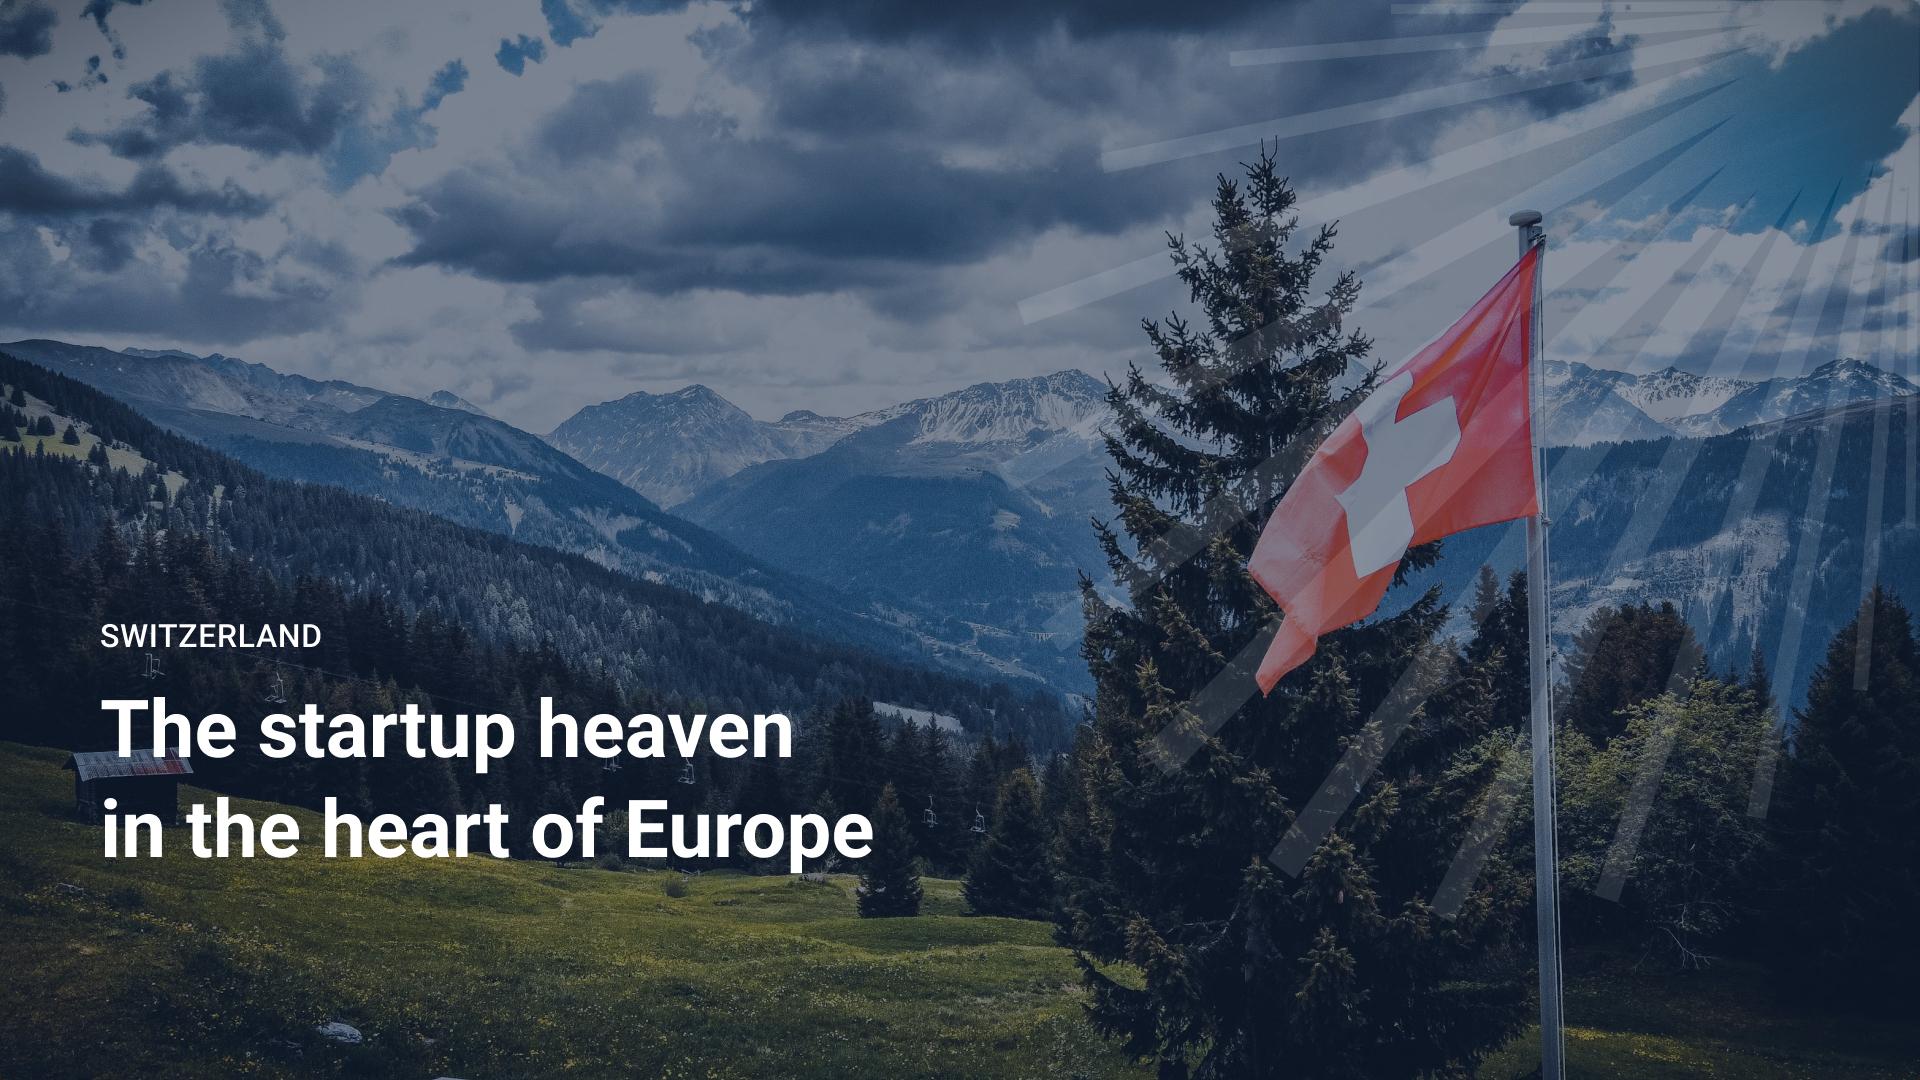 Switzerland: The startup heaven in the heart of Europe